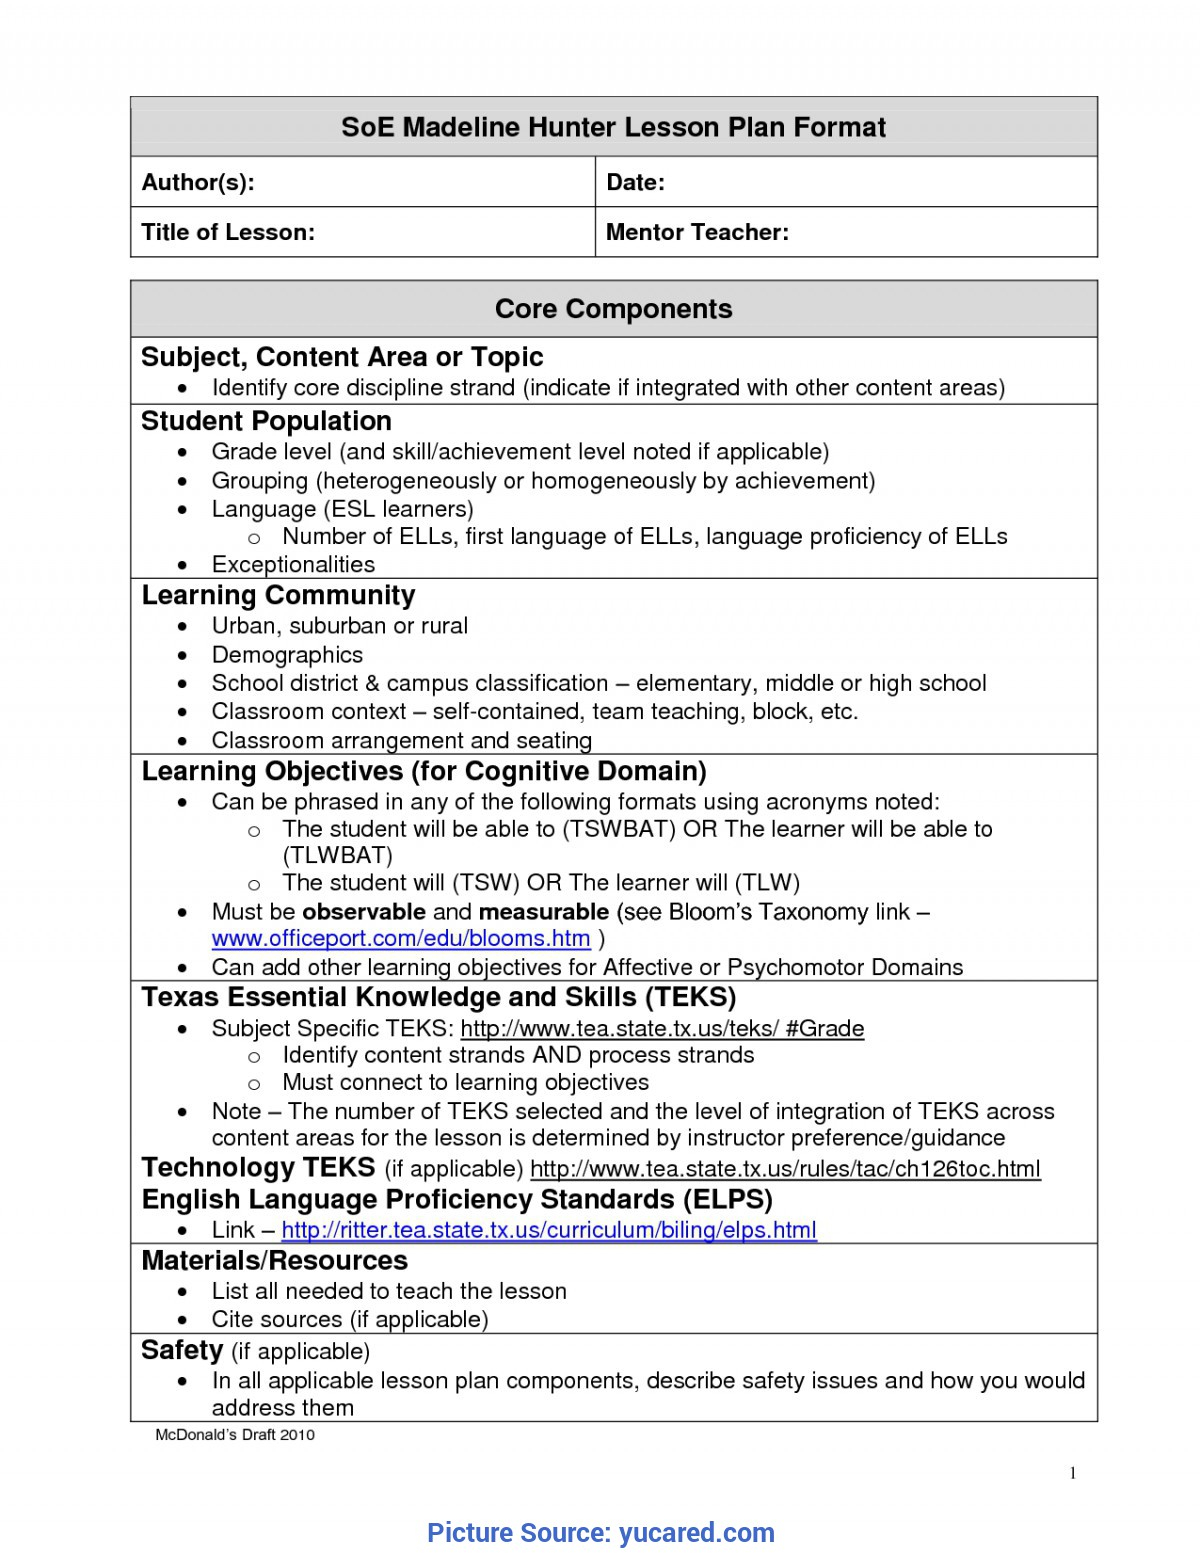 Madeline Hunter Lesson Plan Template Word | Articleezined Throughout Madeline Hunter Lesson Plan Blank Template